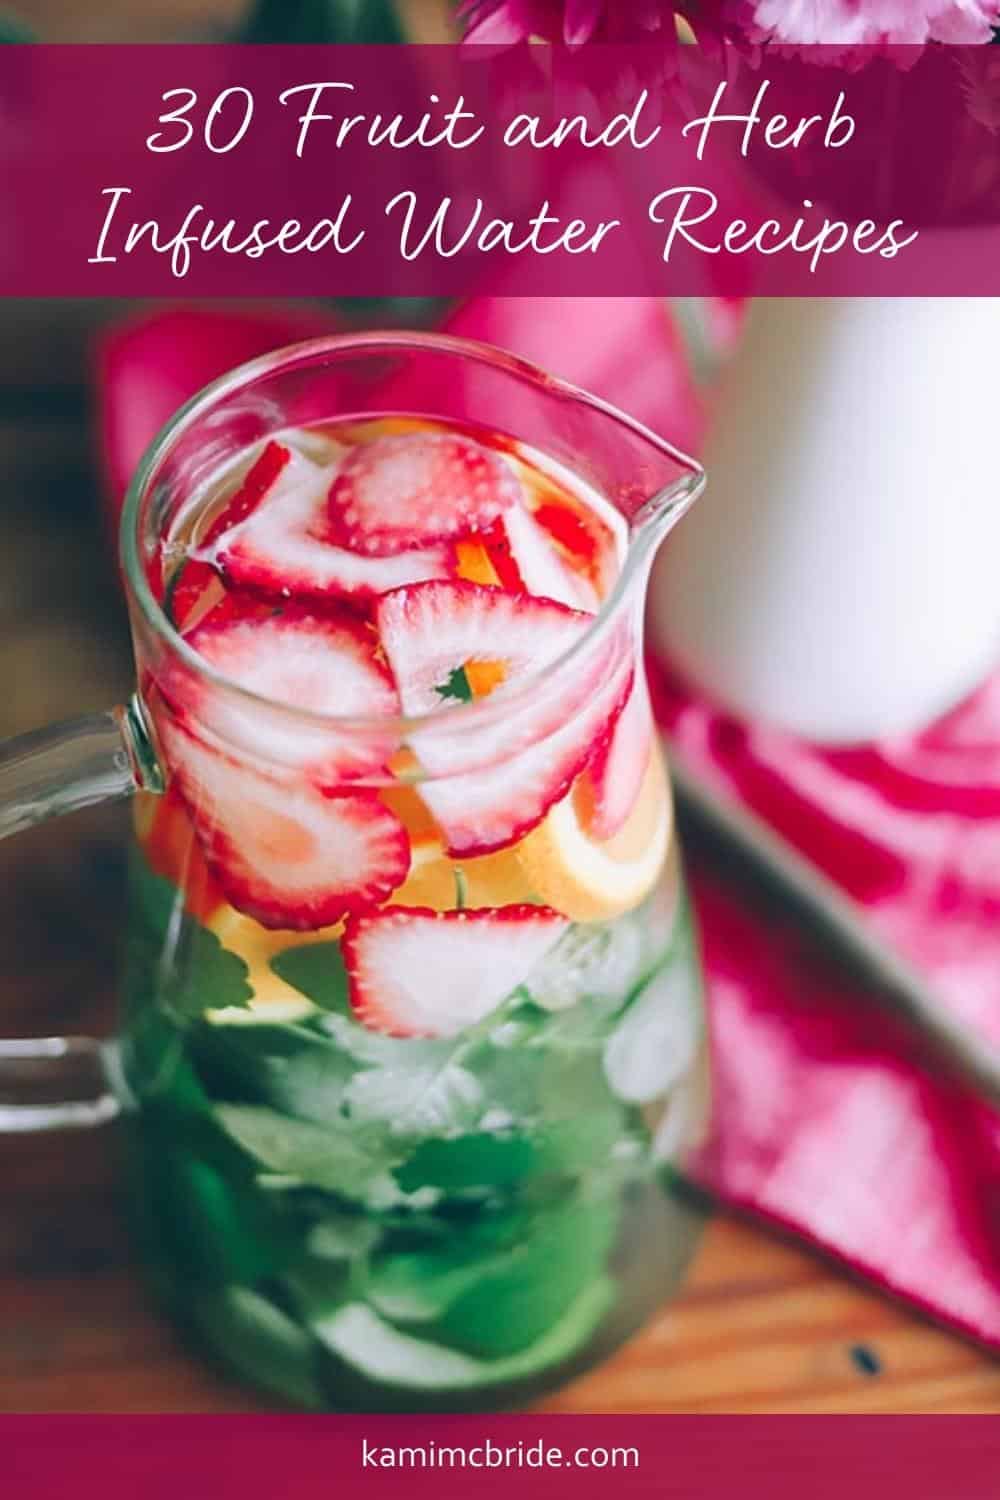 30 fruit and herb infused water recipes